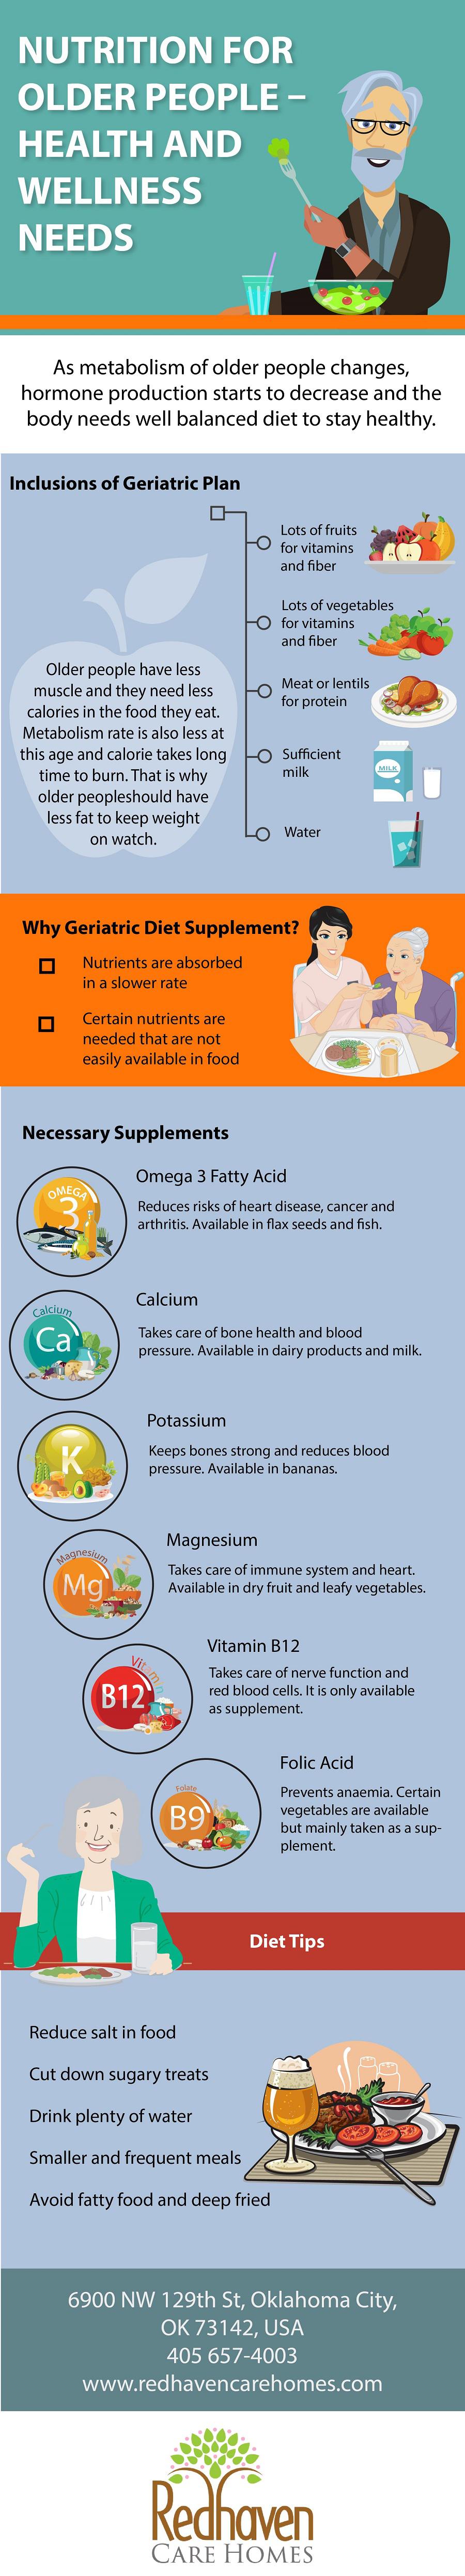 Infographic : Nutrition for Older People - Health & Wellness Needs ...